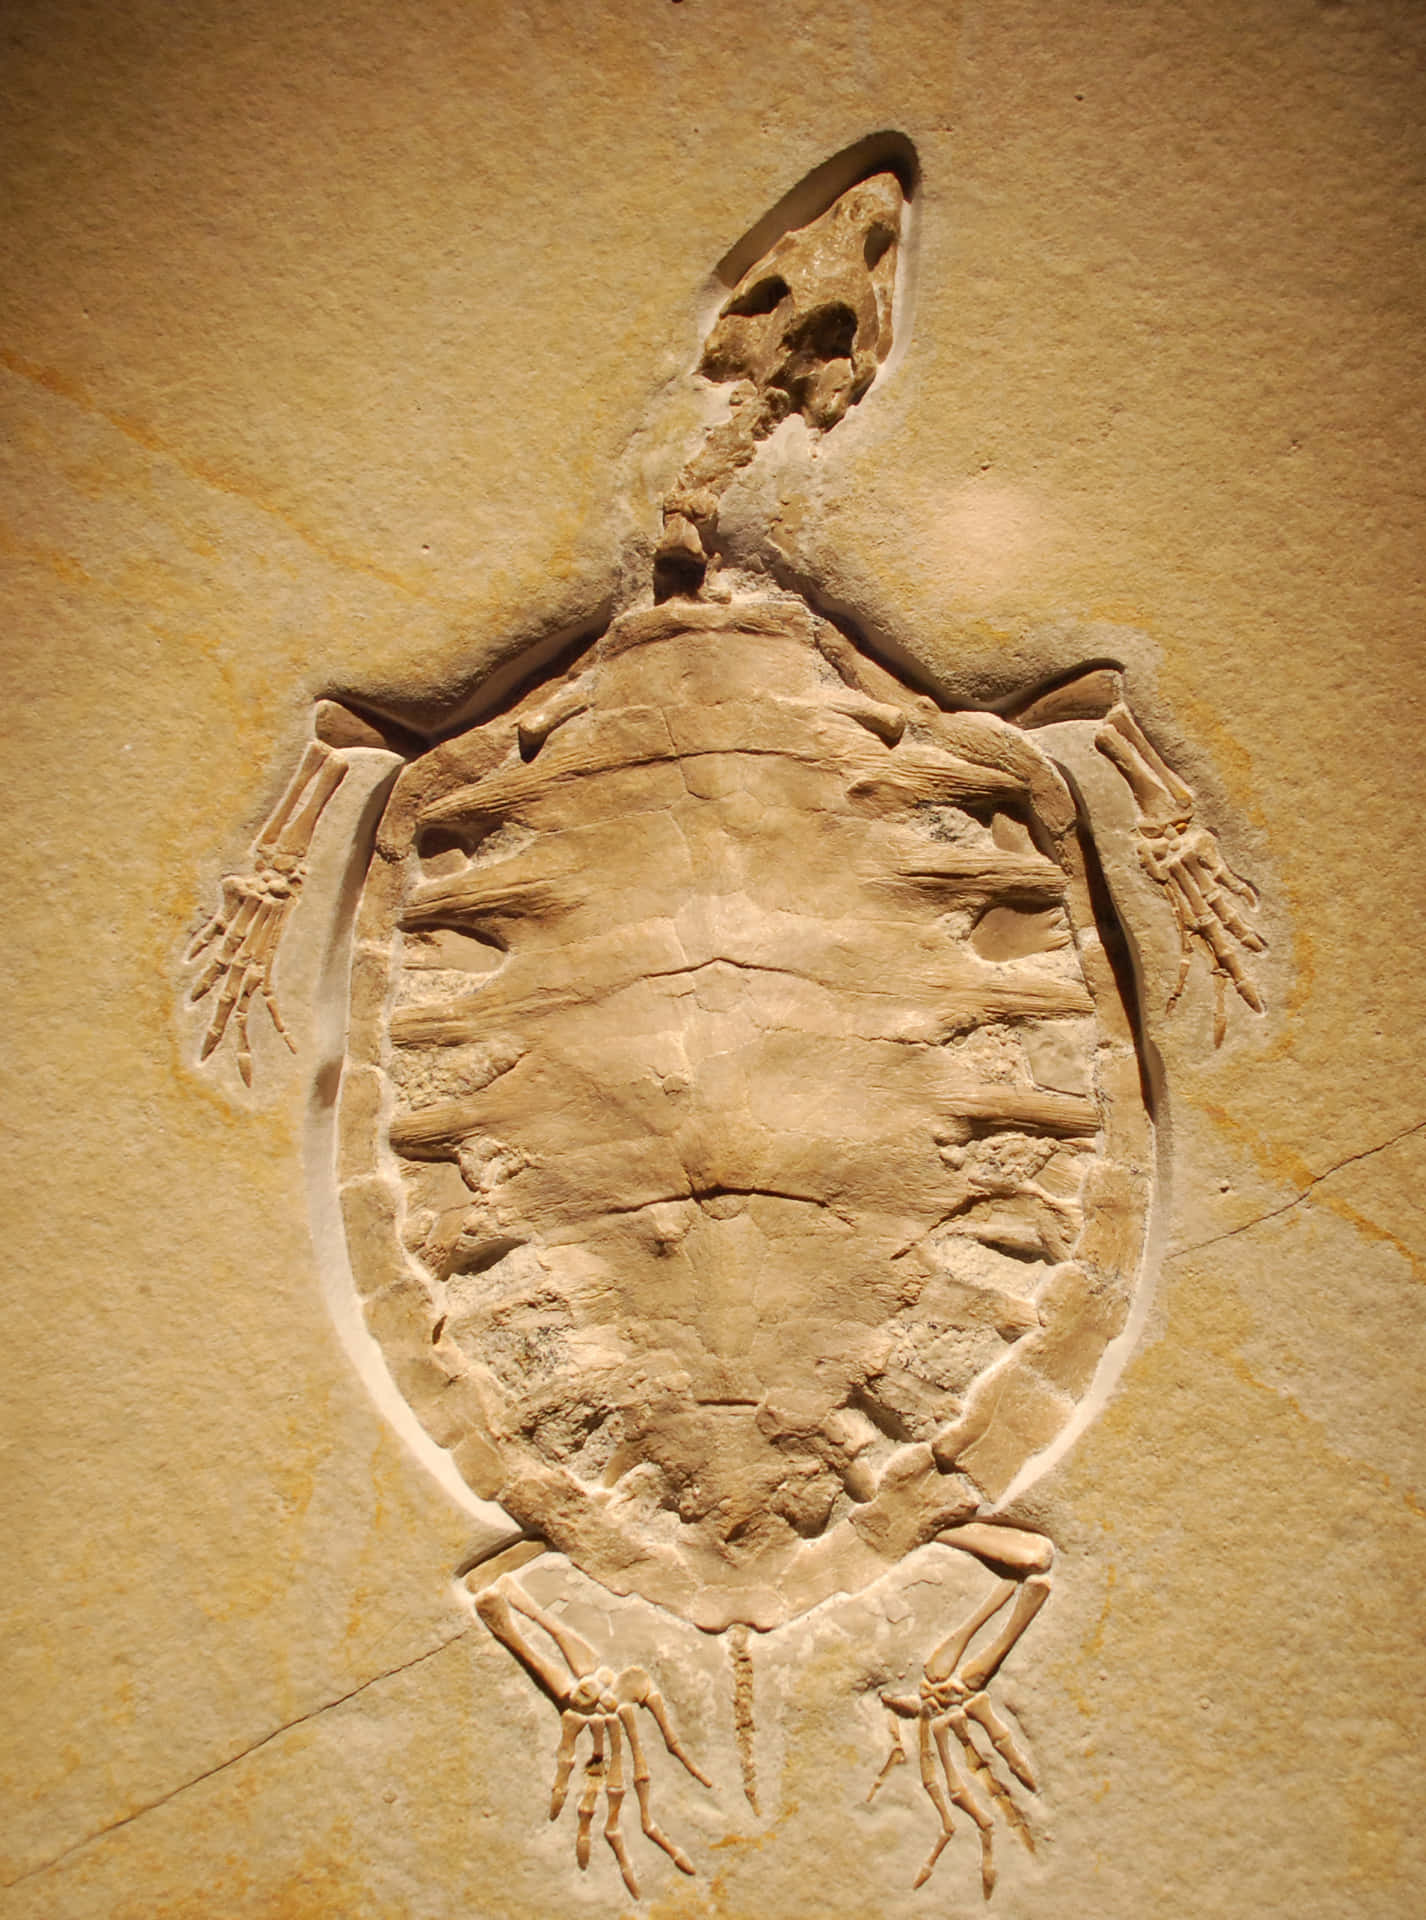 A Fossil Turtle Is Carved Into A Stone Wall